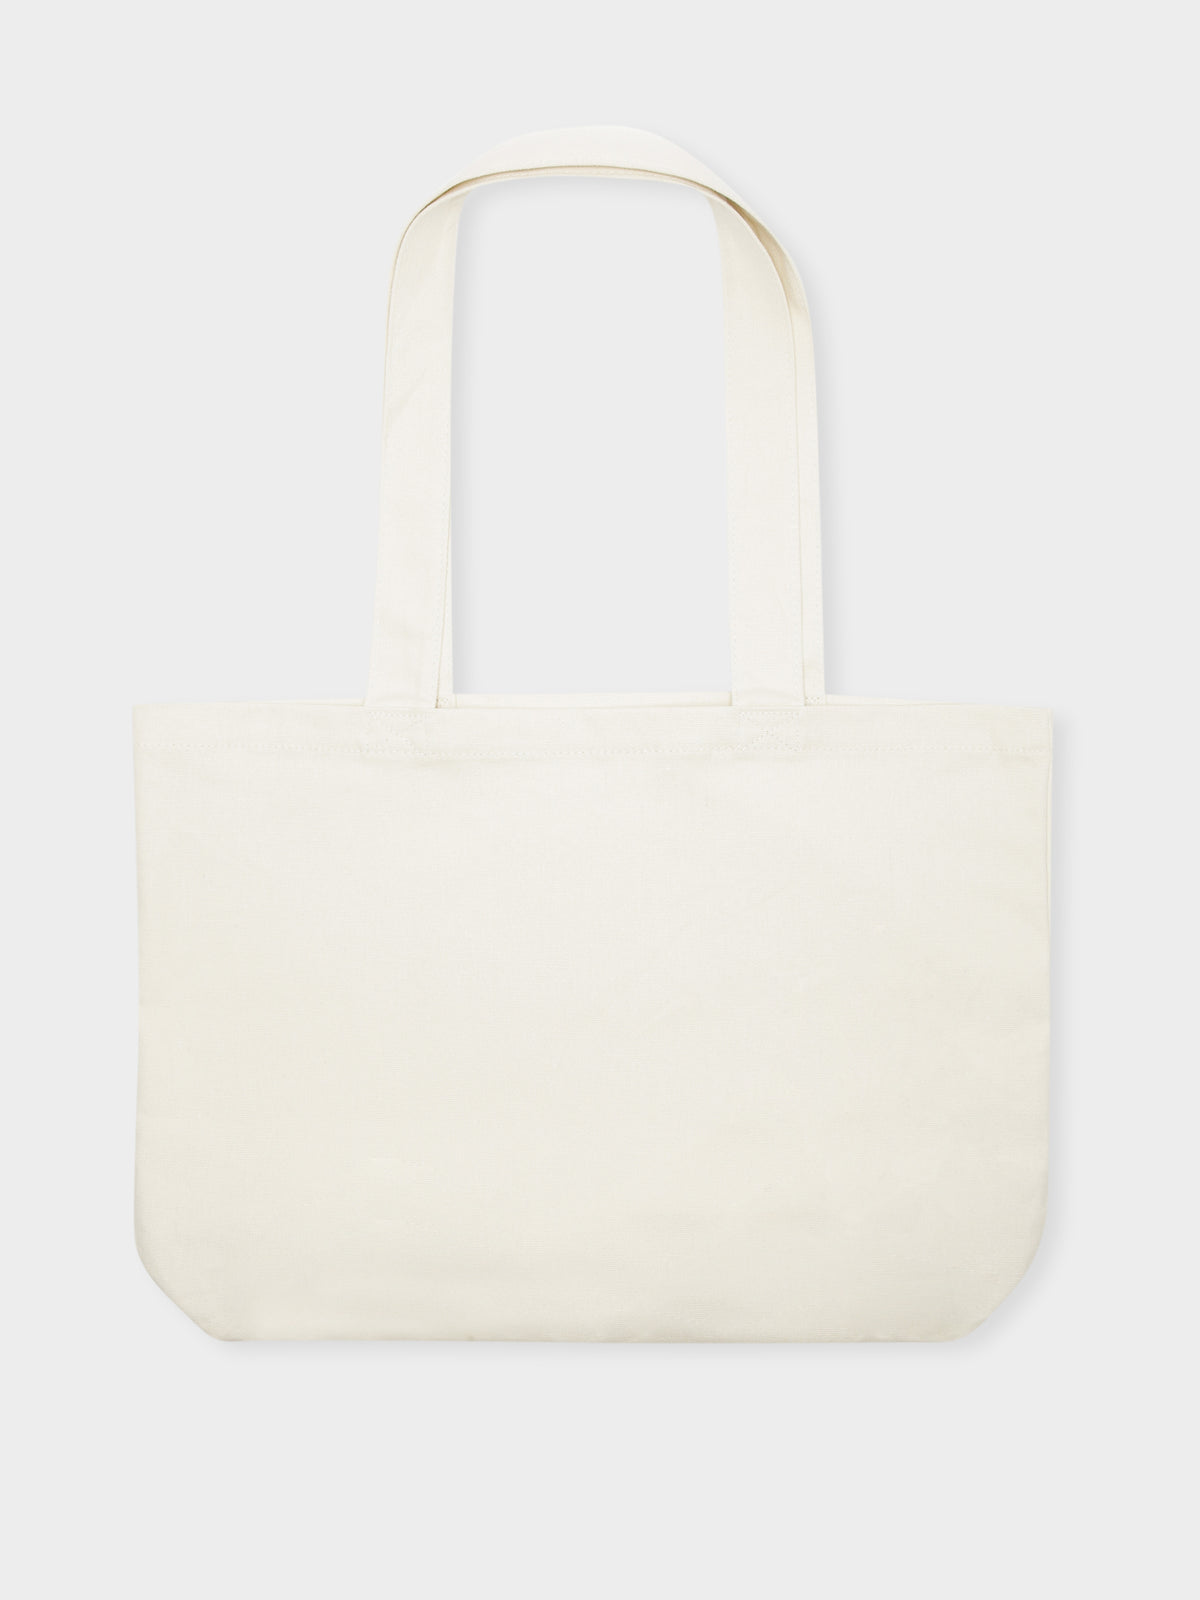 Bad Habits Tote in Dirty White